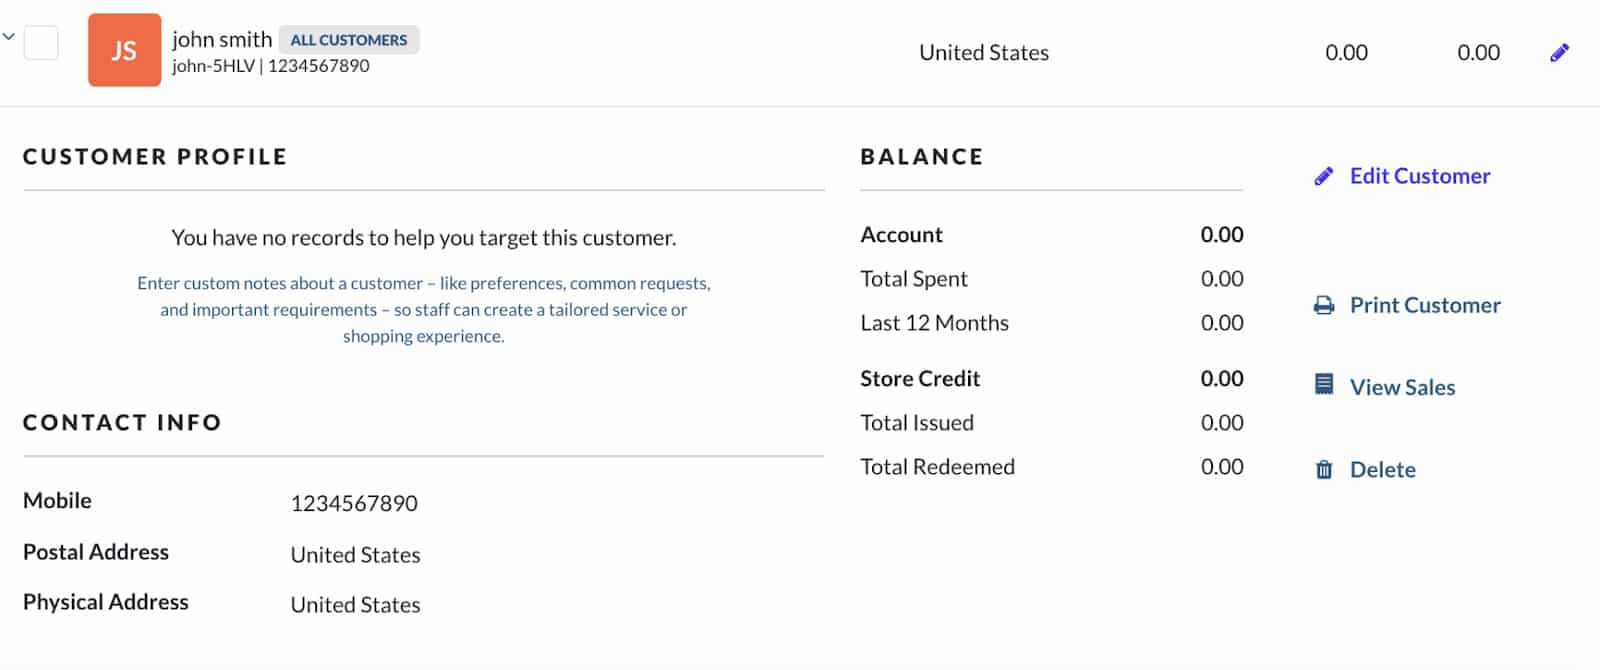 Vend's customer profile information like activity, personal information, and store credit status.